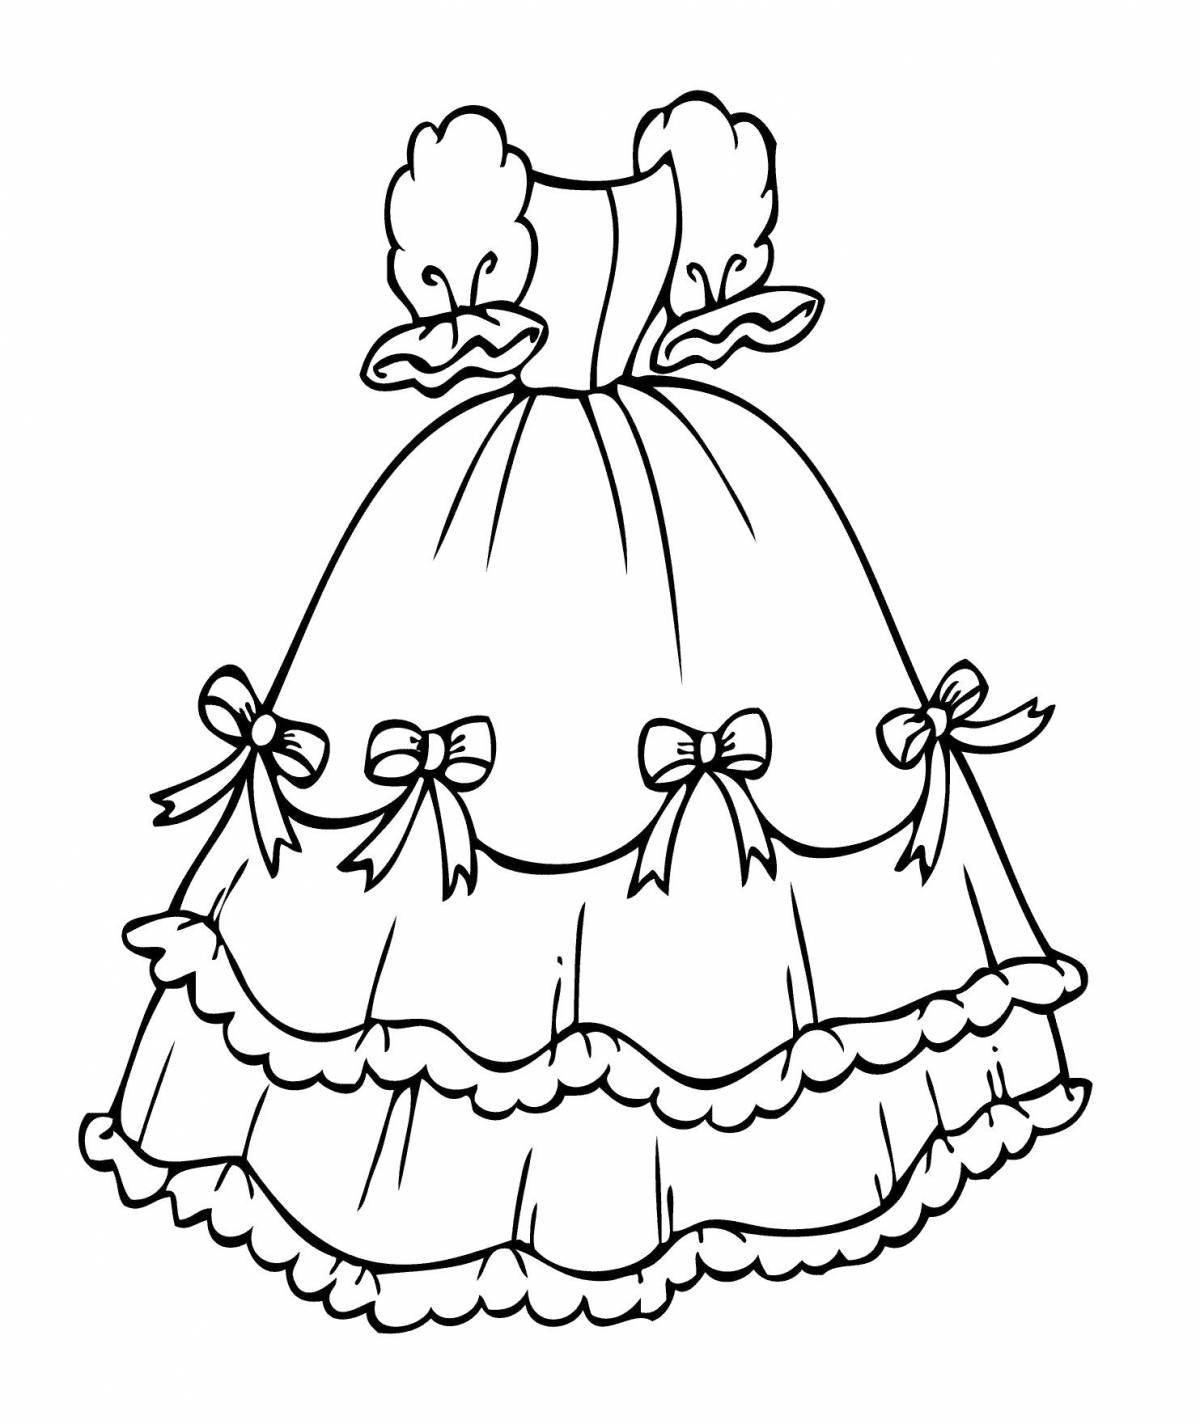 Coloring page funny dress for children 2-3 years old